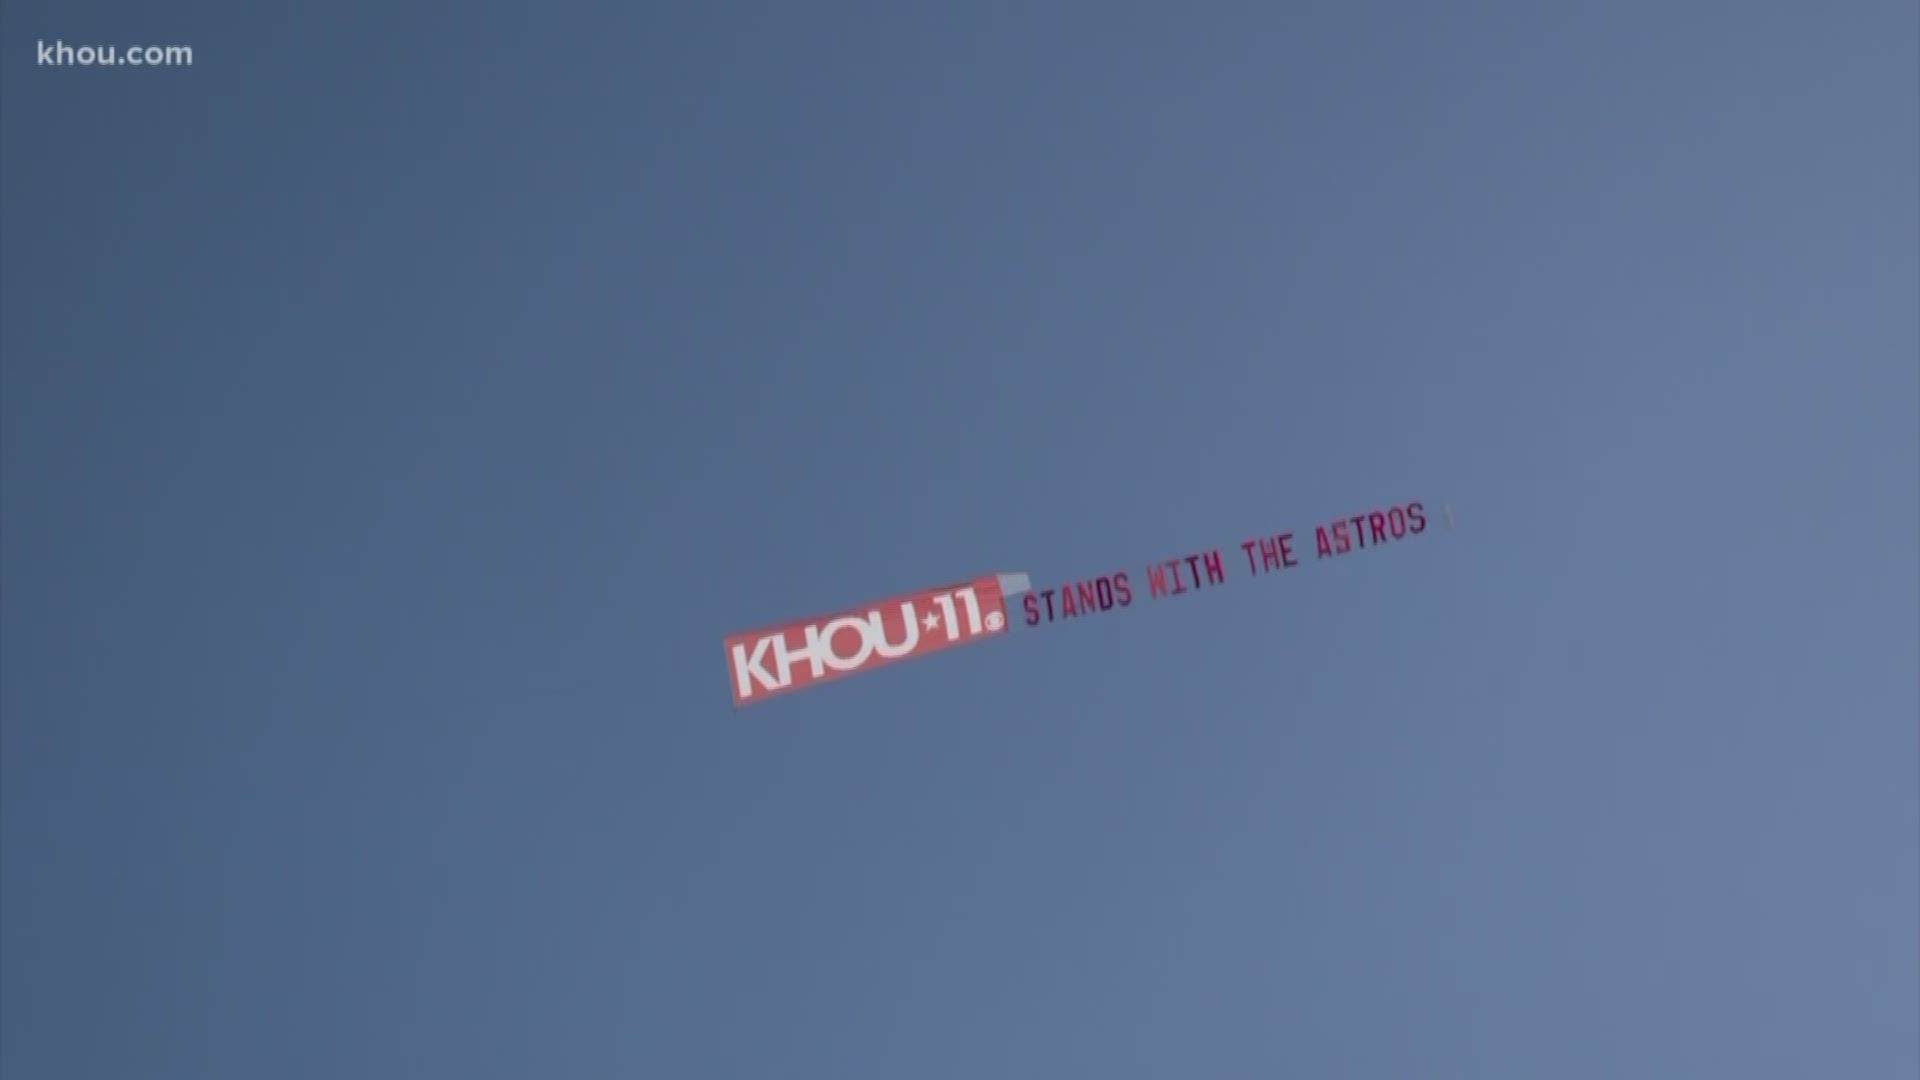 We are showing our support for the Houston Astros with a plane banner that reads "KHOU 11 Stands with the Astros."